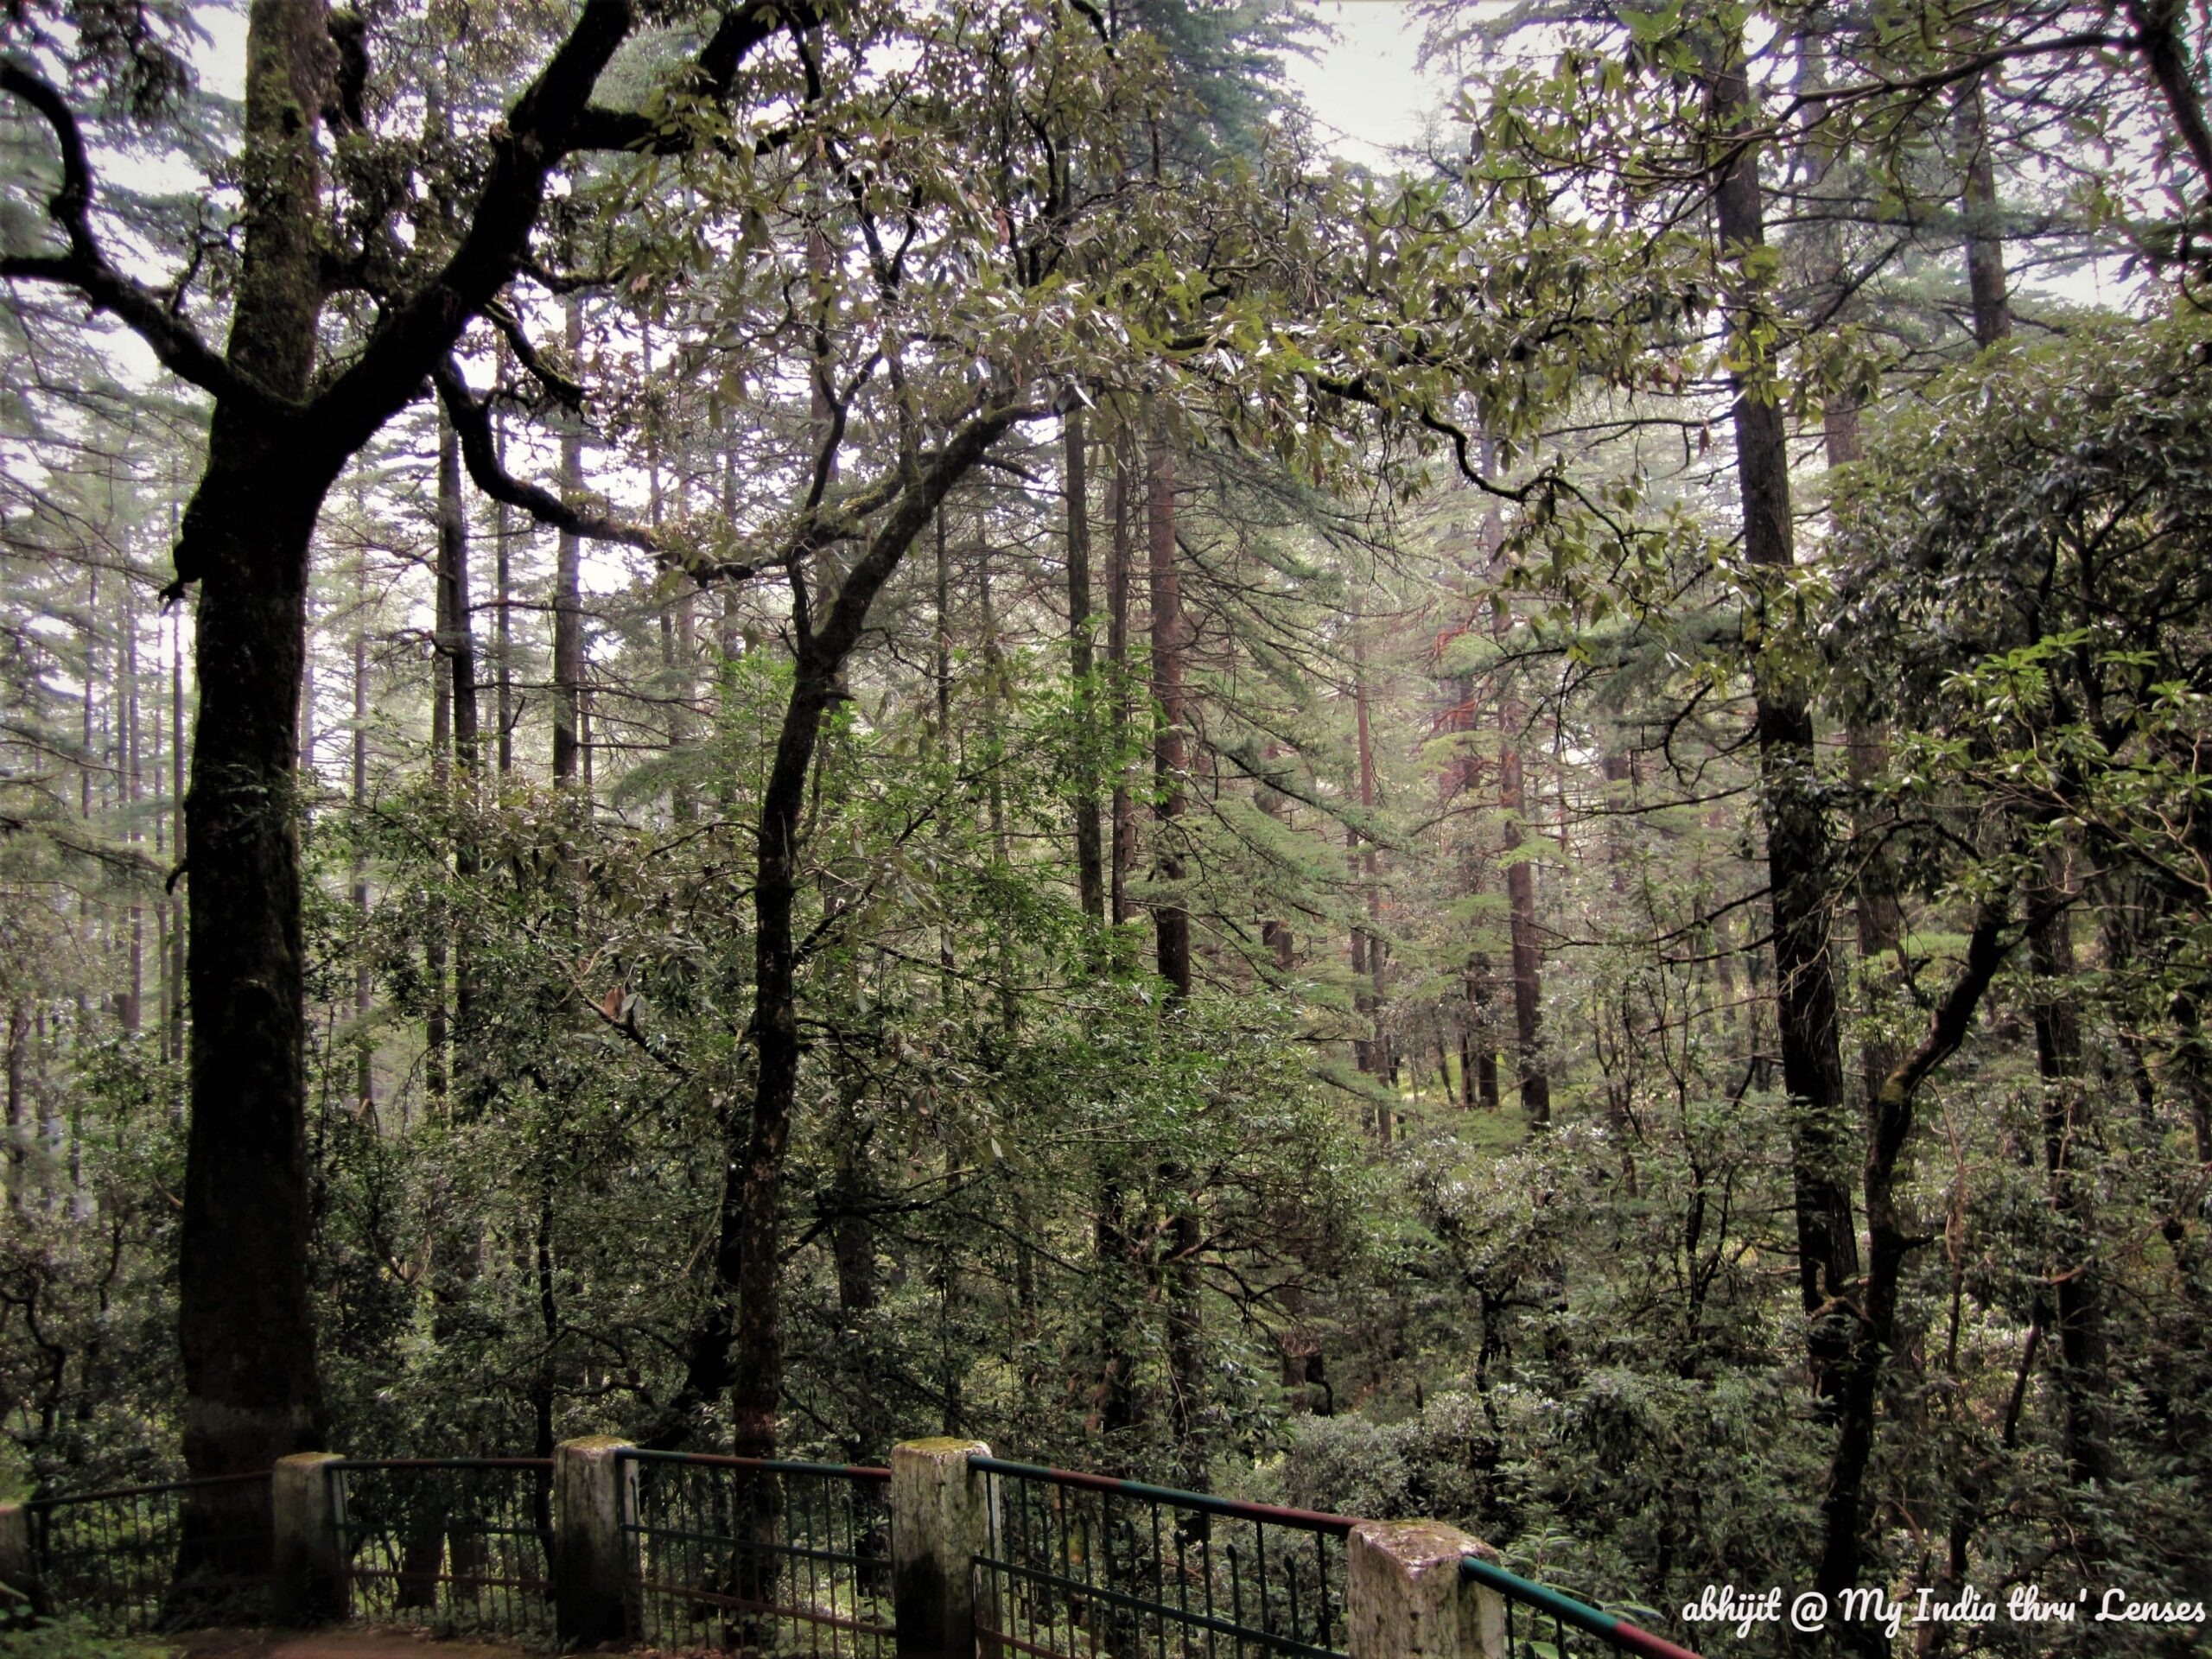 The way towards the Temple through deodar & pine forest